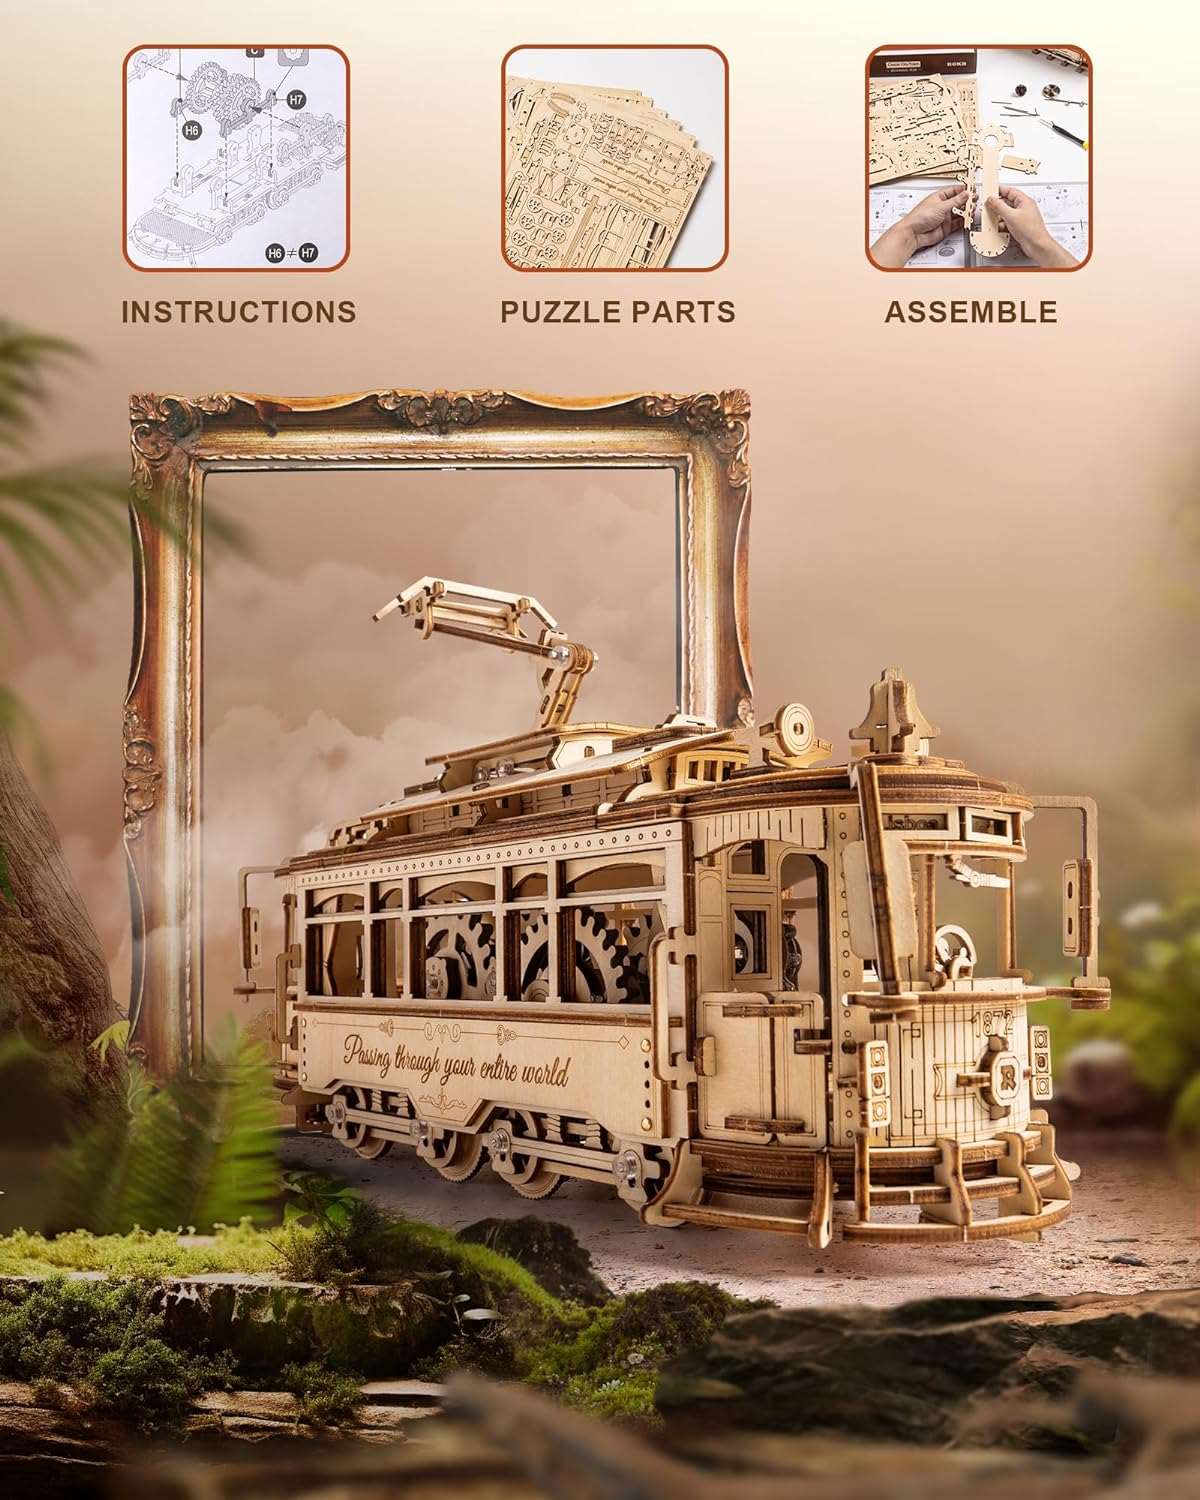 3D Wooden Puzzles Model Car Kits for Adults to Build - Wooden Toy Tram Train Set with Railway - Cykapu